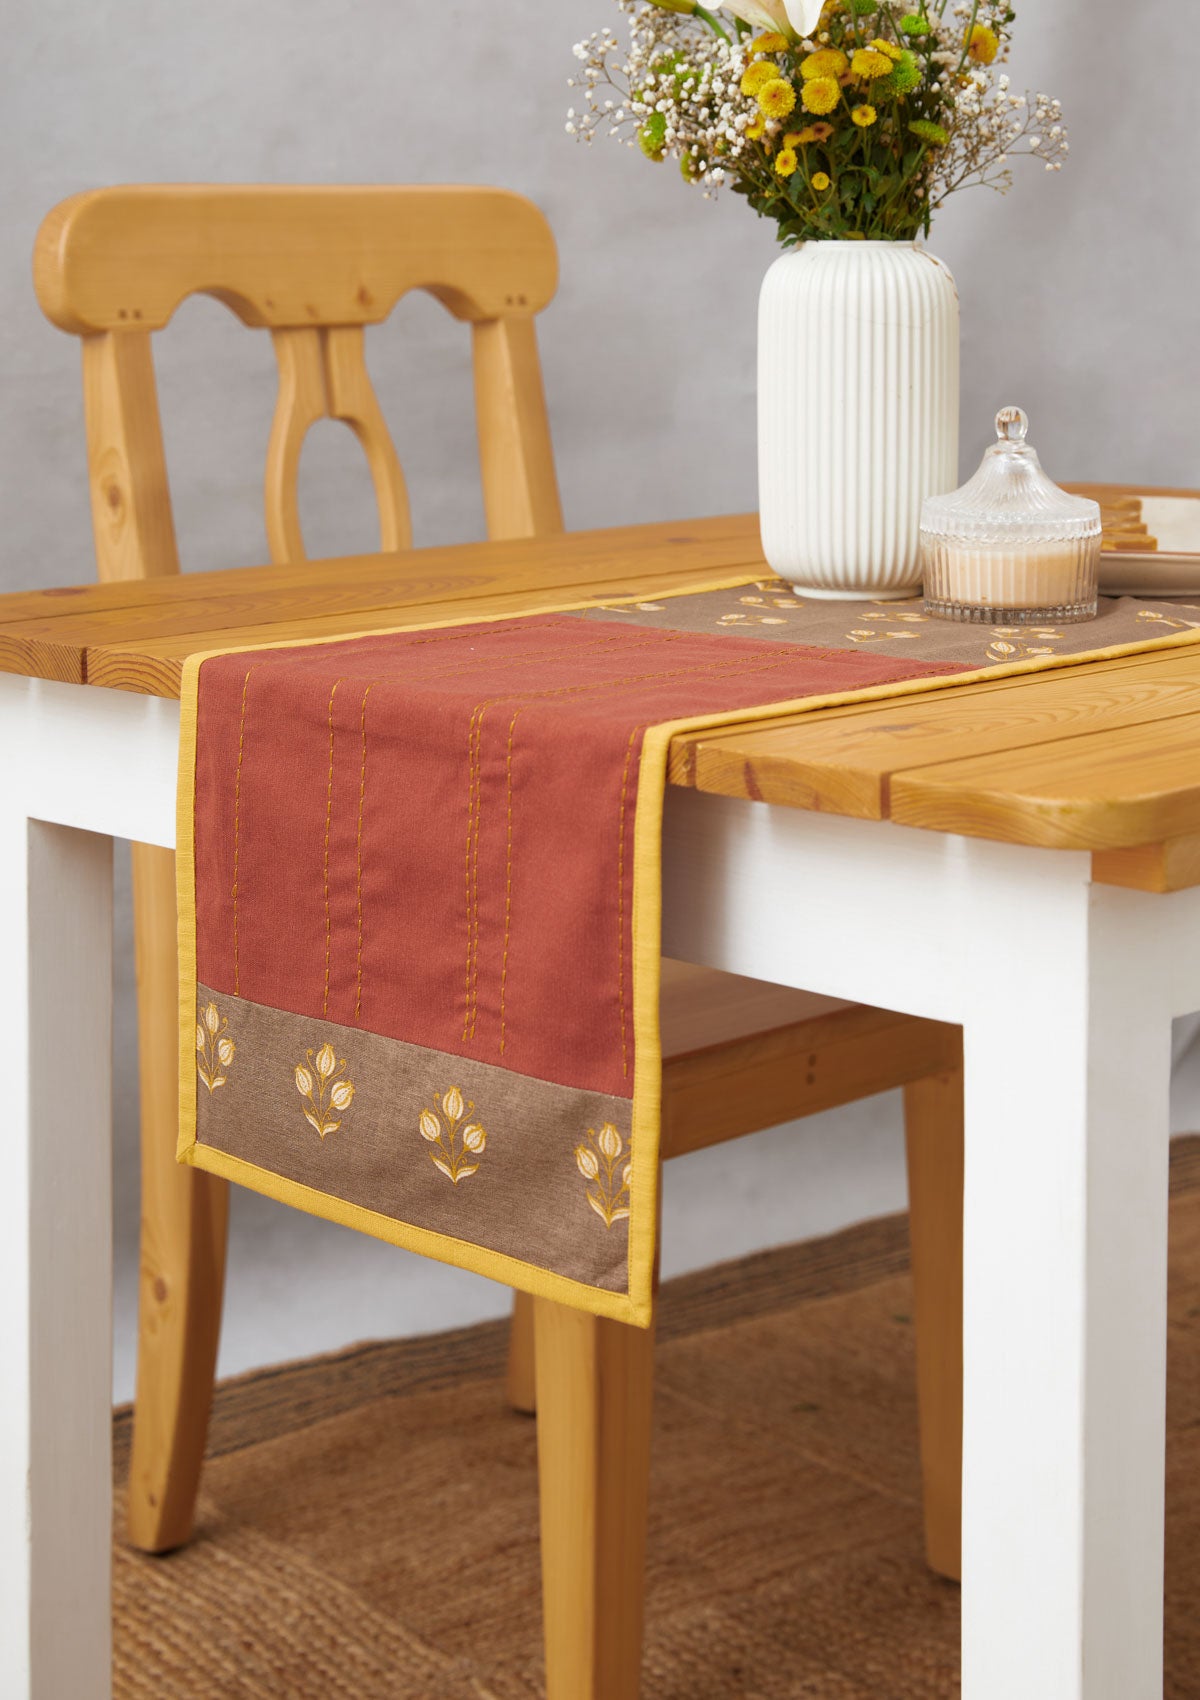 Great Rann Patchwork Cotton Table Runner - Brick Red